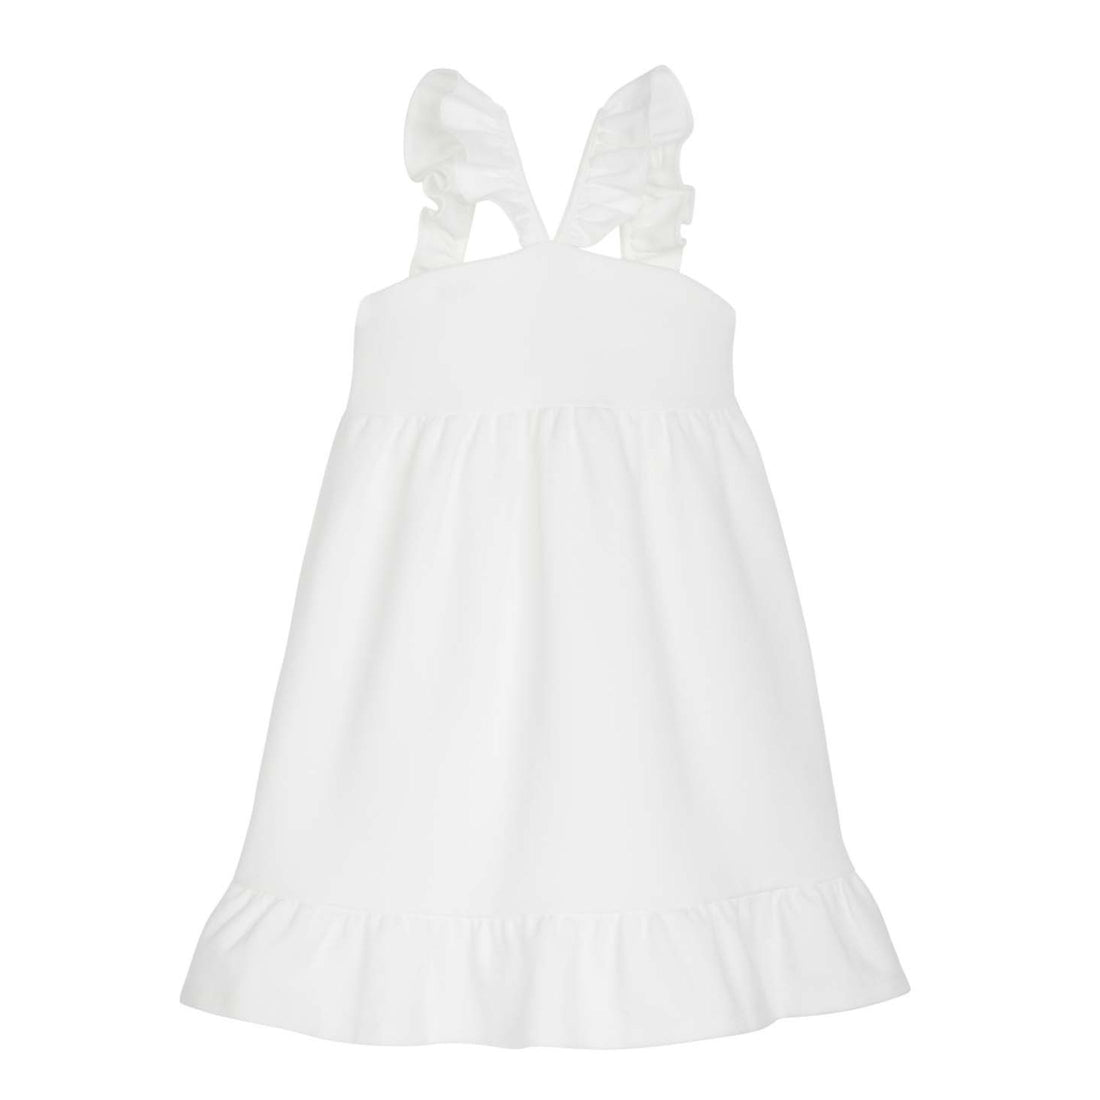 tween girls with pique dress with ruffle sleeves